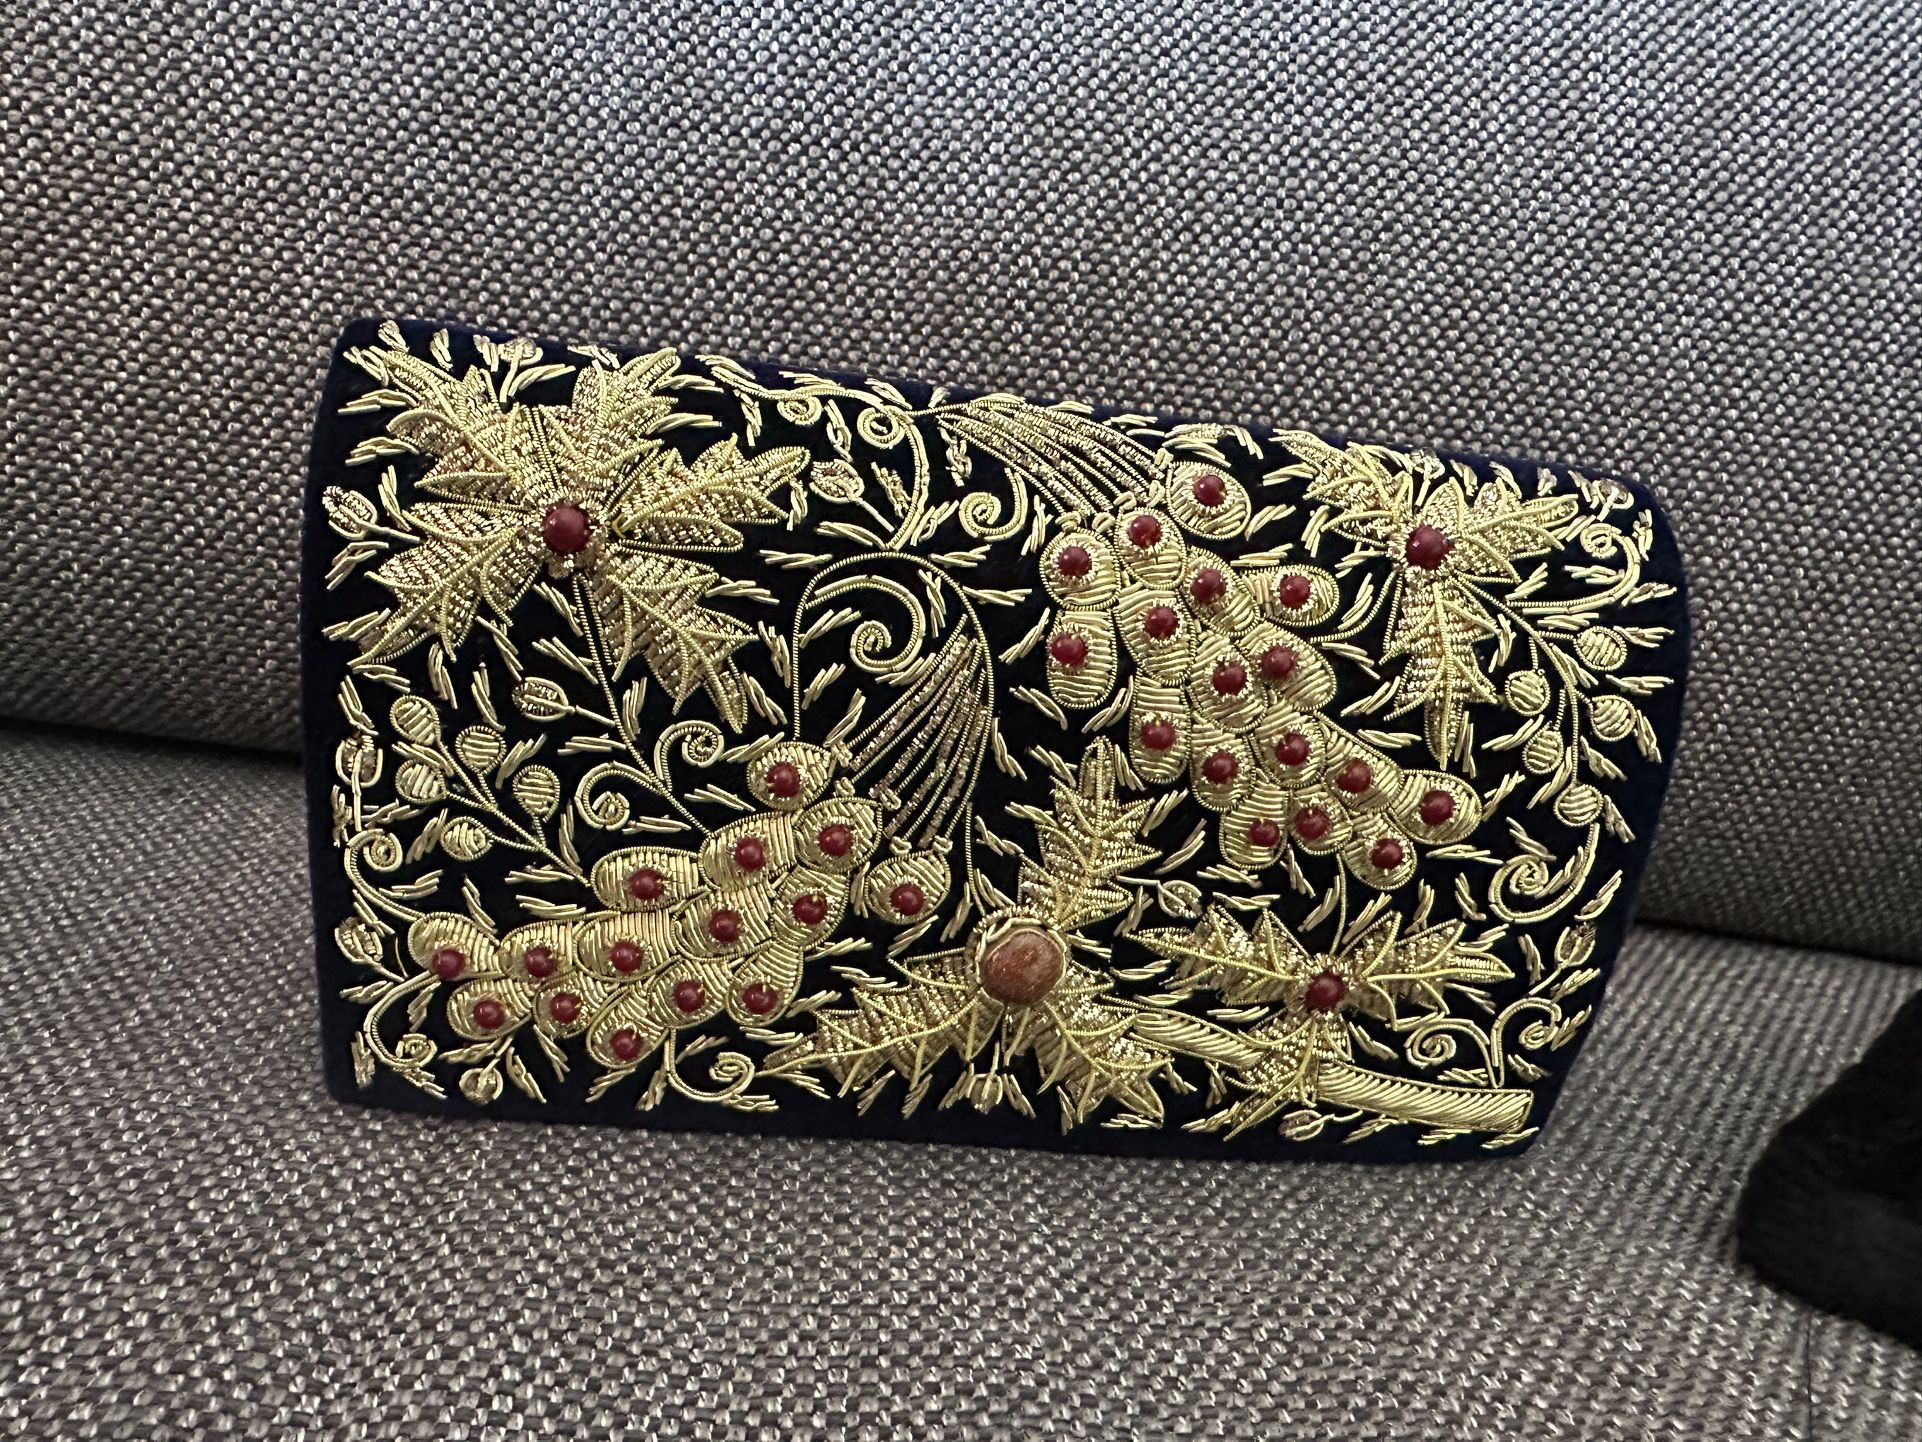 Embroidered Bridal / fashion Clutch / Purse with gemstones